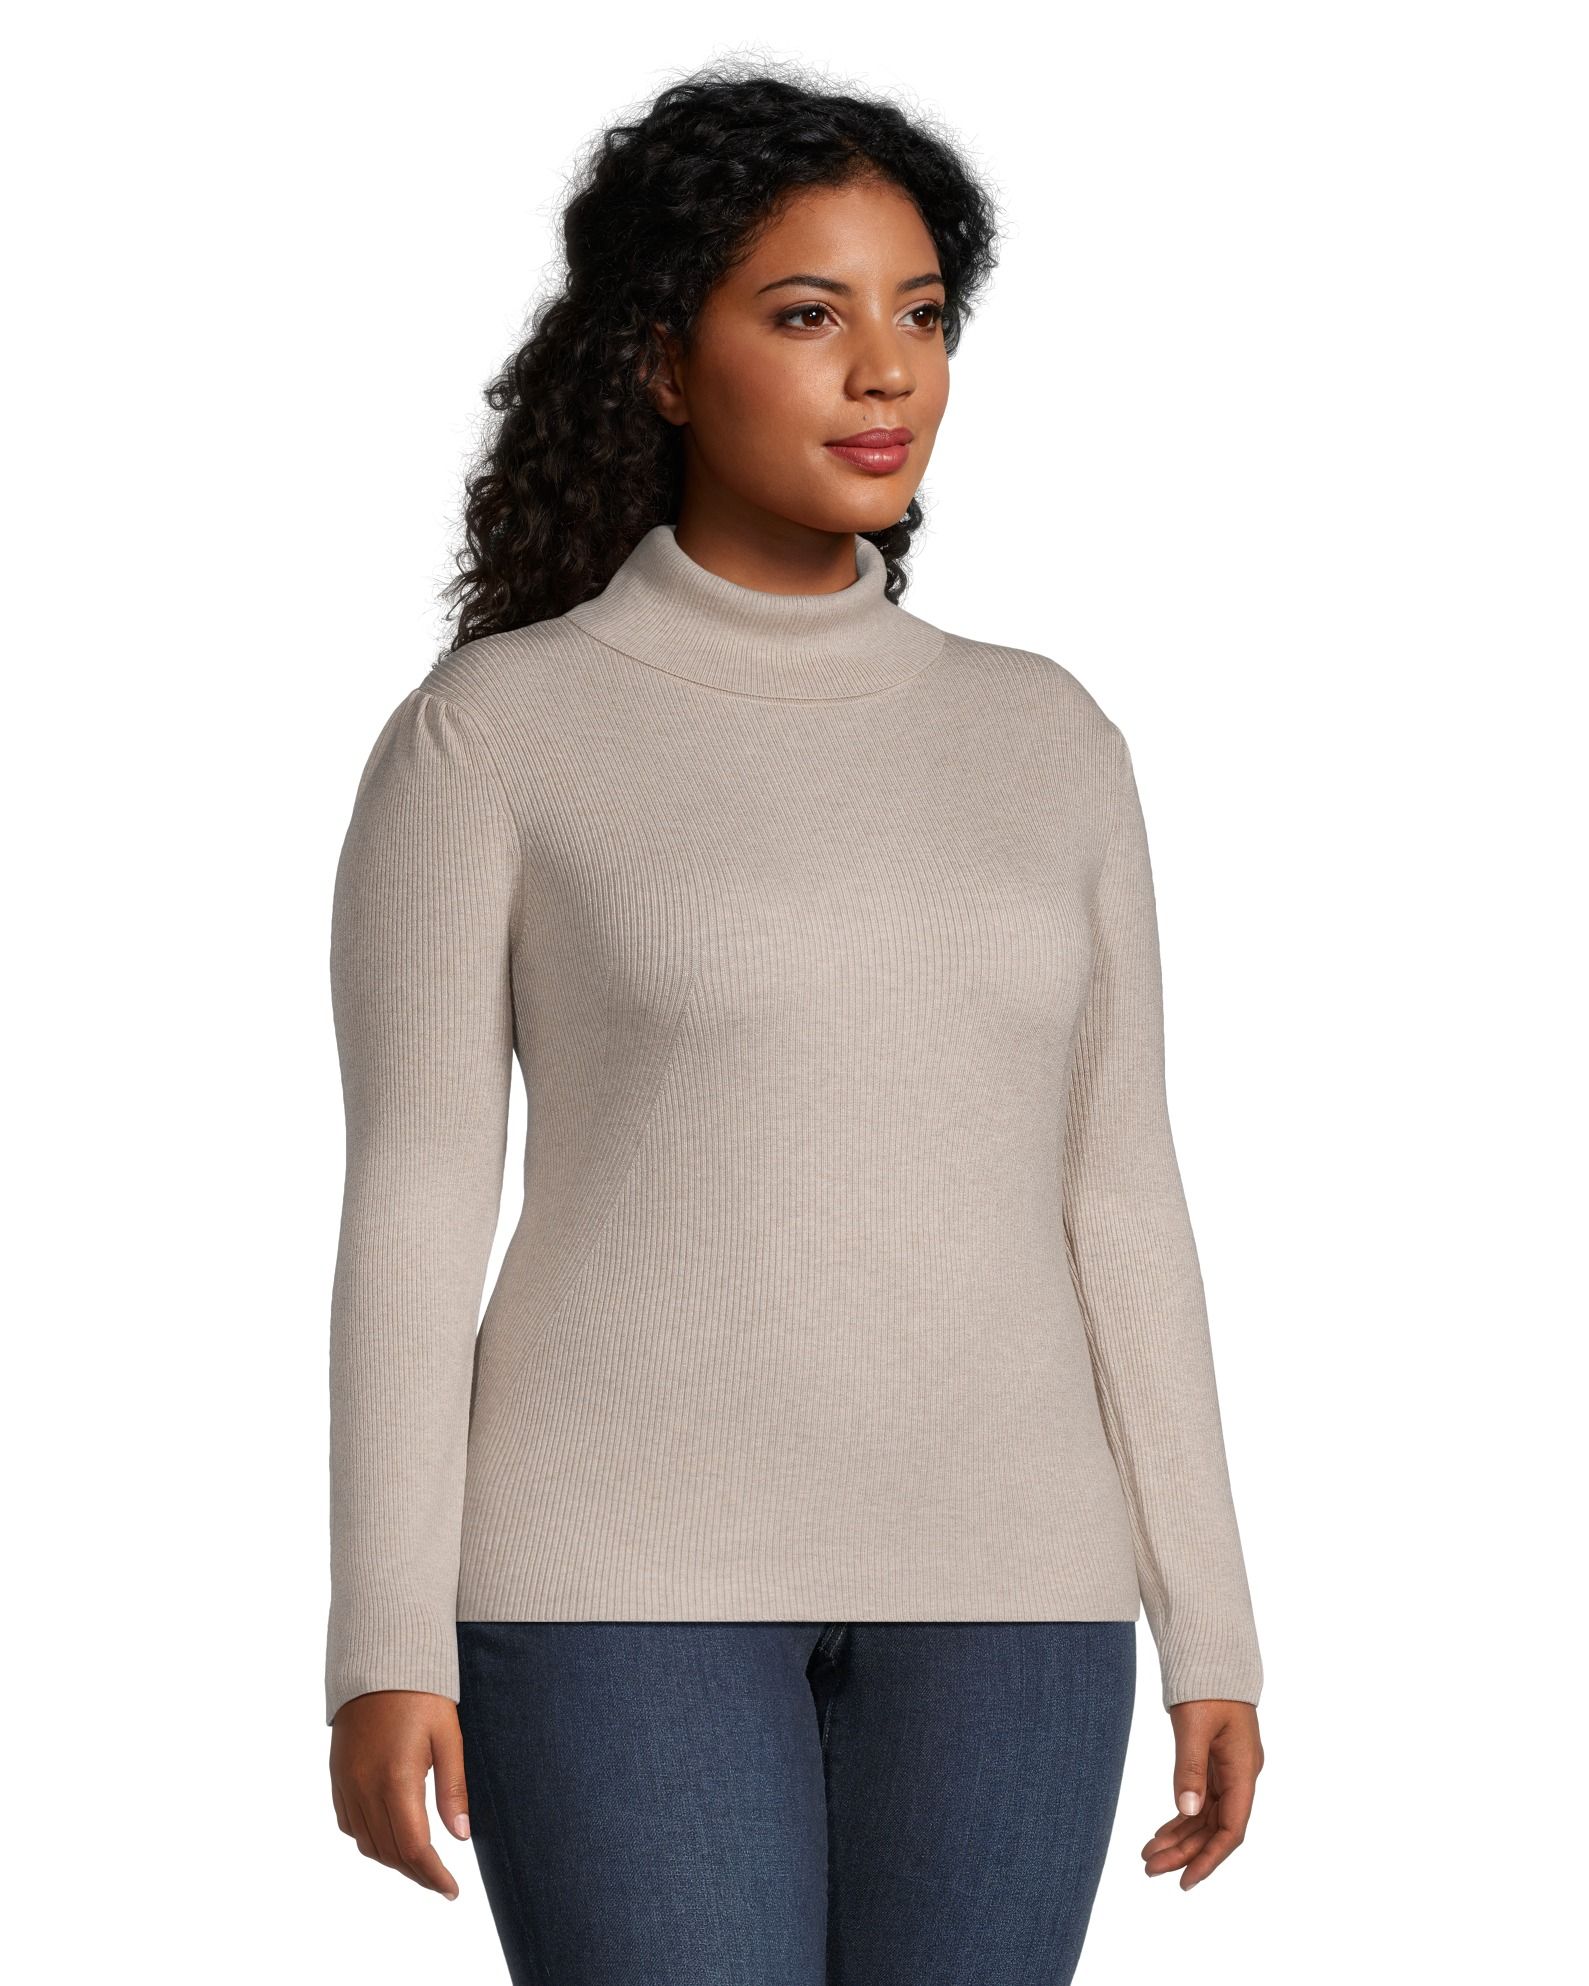 Denver Hayes Women's Semi Fitted Cozy Mock Neck Jaquard Pullover